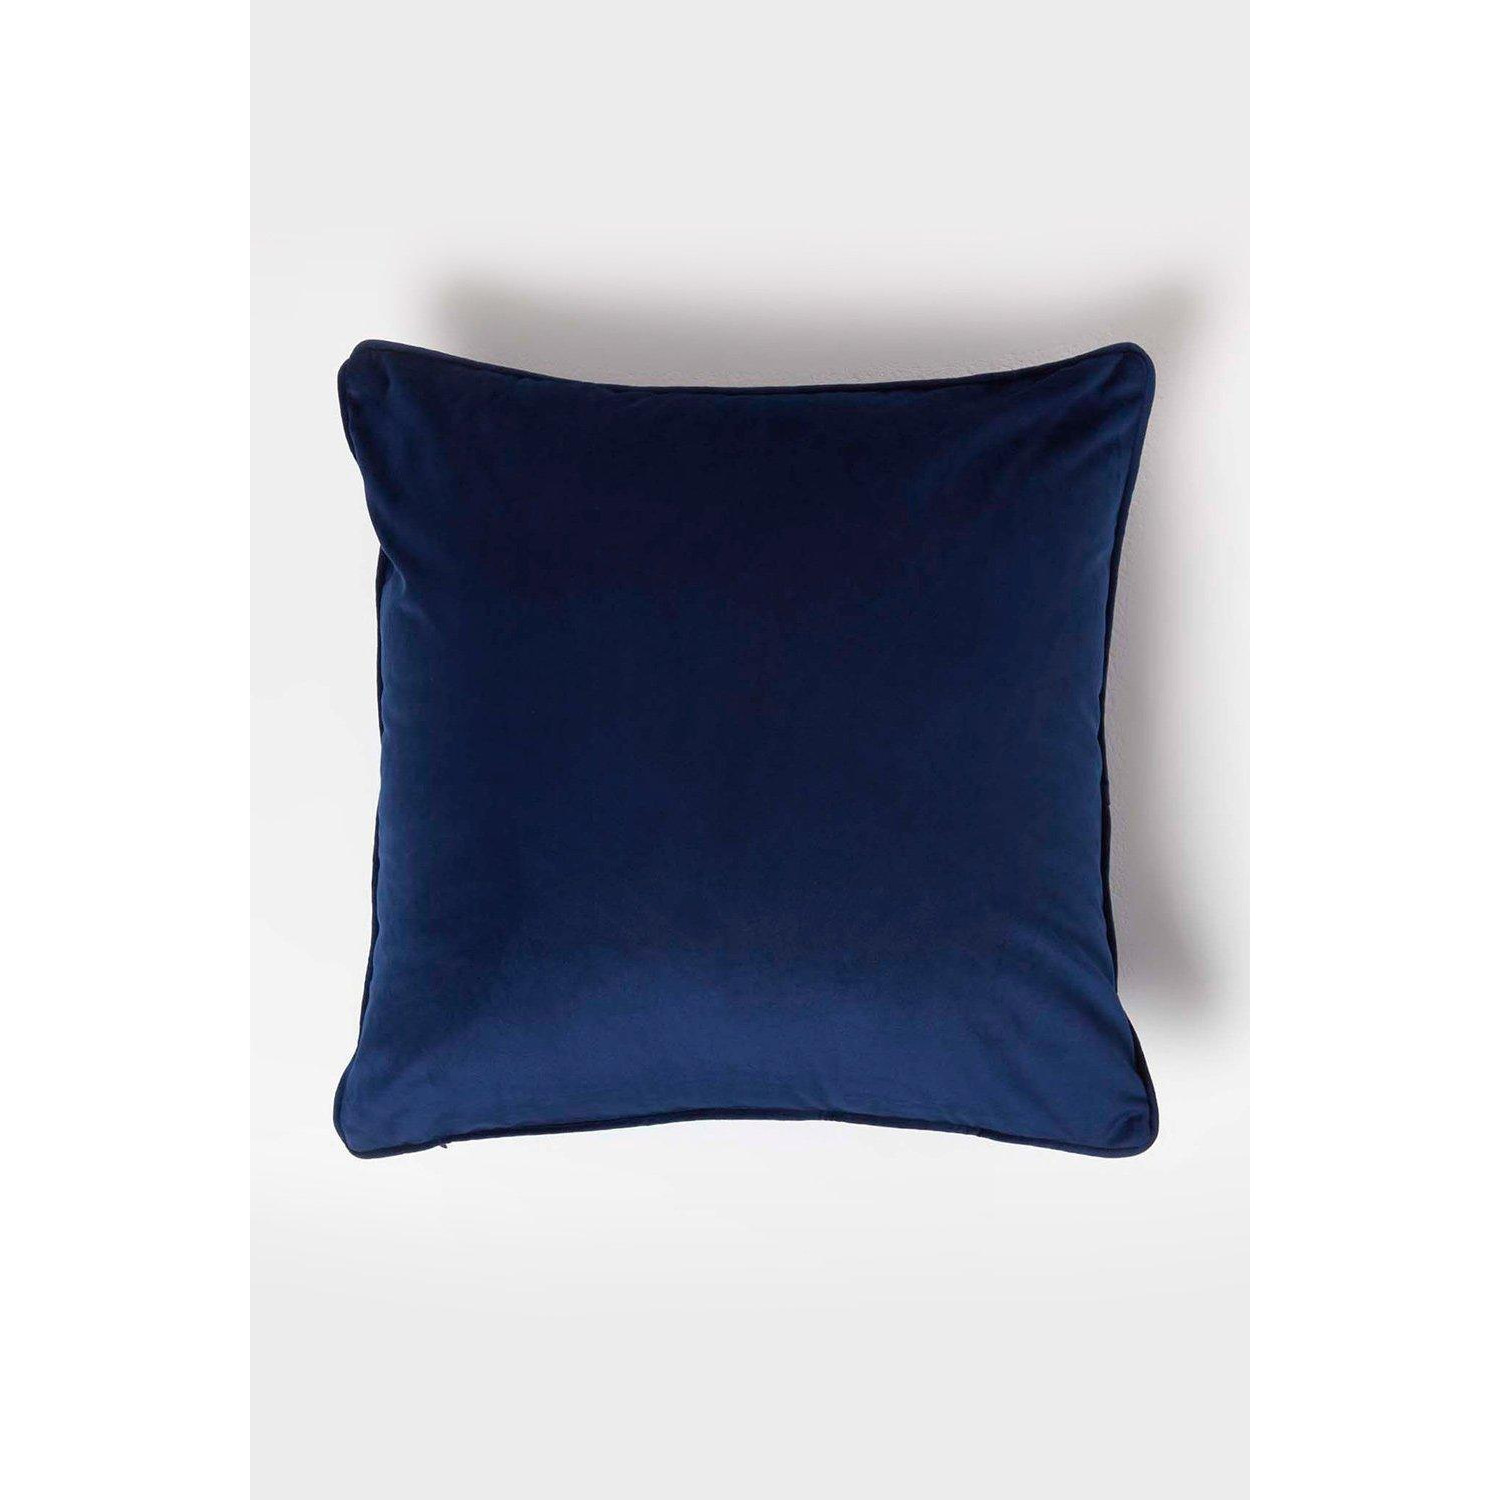 Filled Velvet Cushion with Piped Edge 46 x 46 cm - image 1